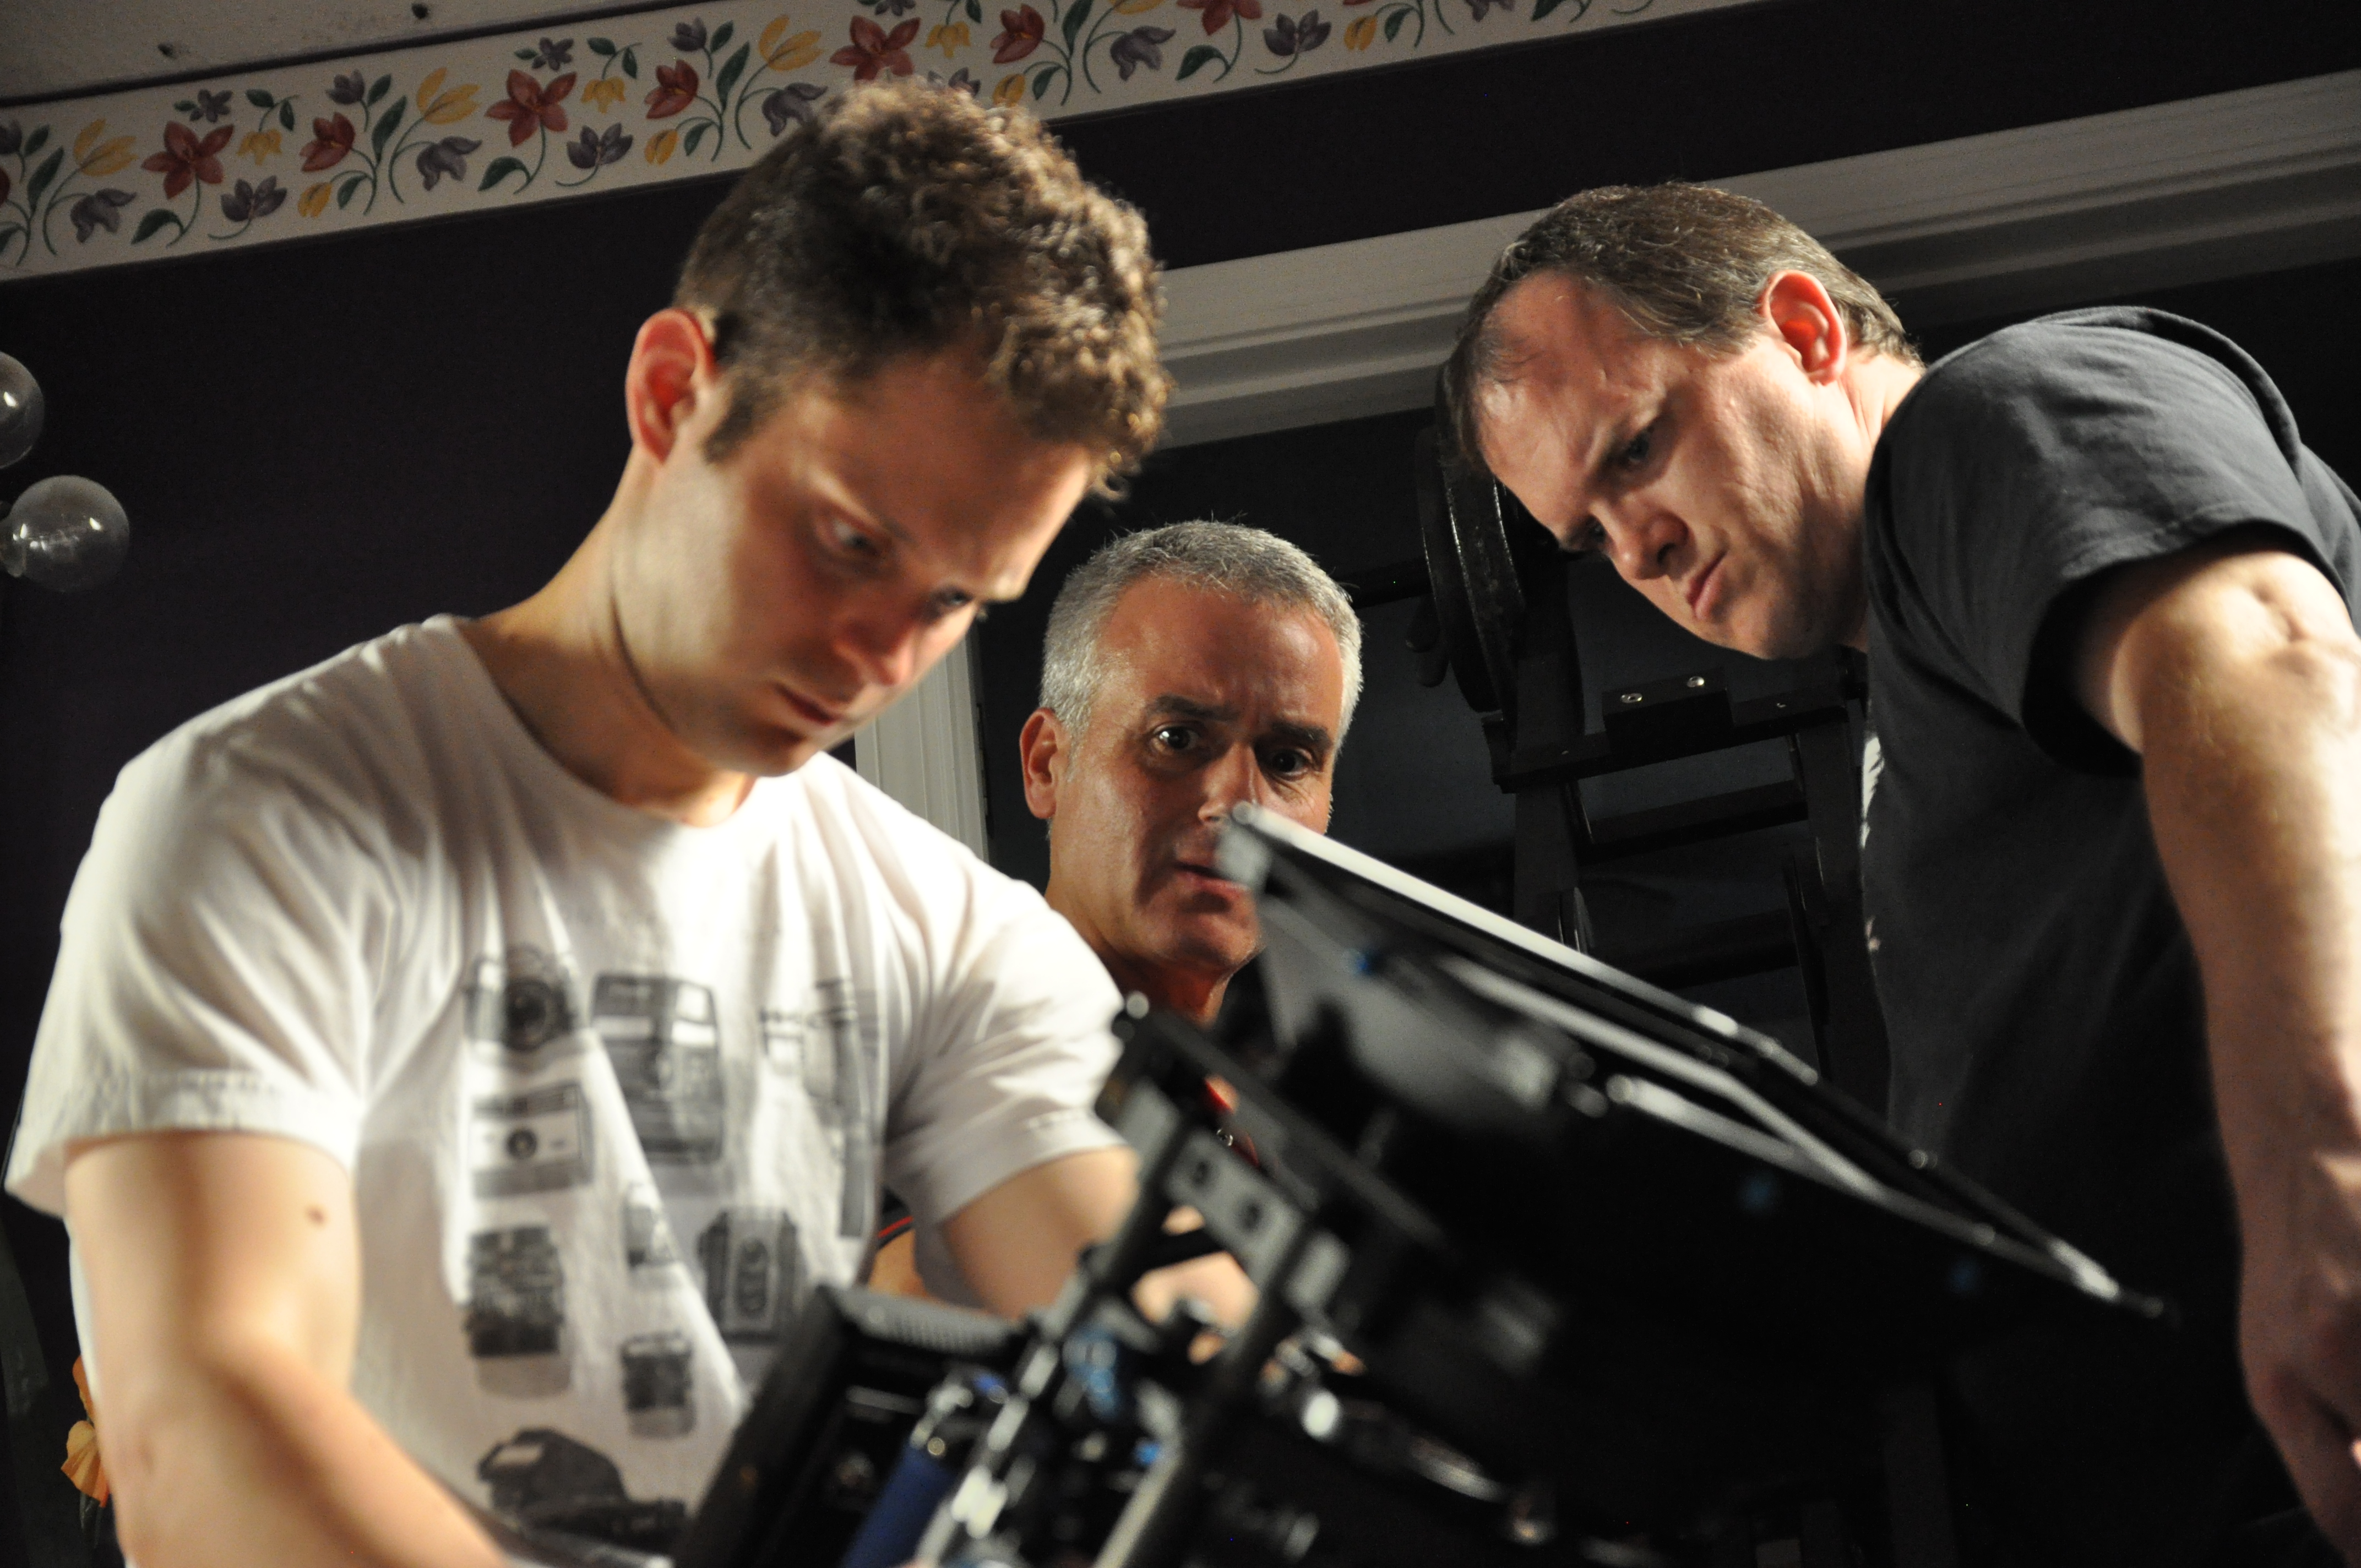 Filming: Excalibur Enhancements. from left to right: Chris Cashon: Director of Photography, Dean Ferreira: Director, Wofford Jones, Assistant Director of Photography